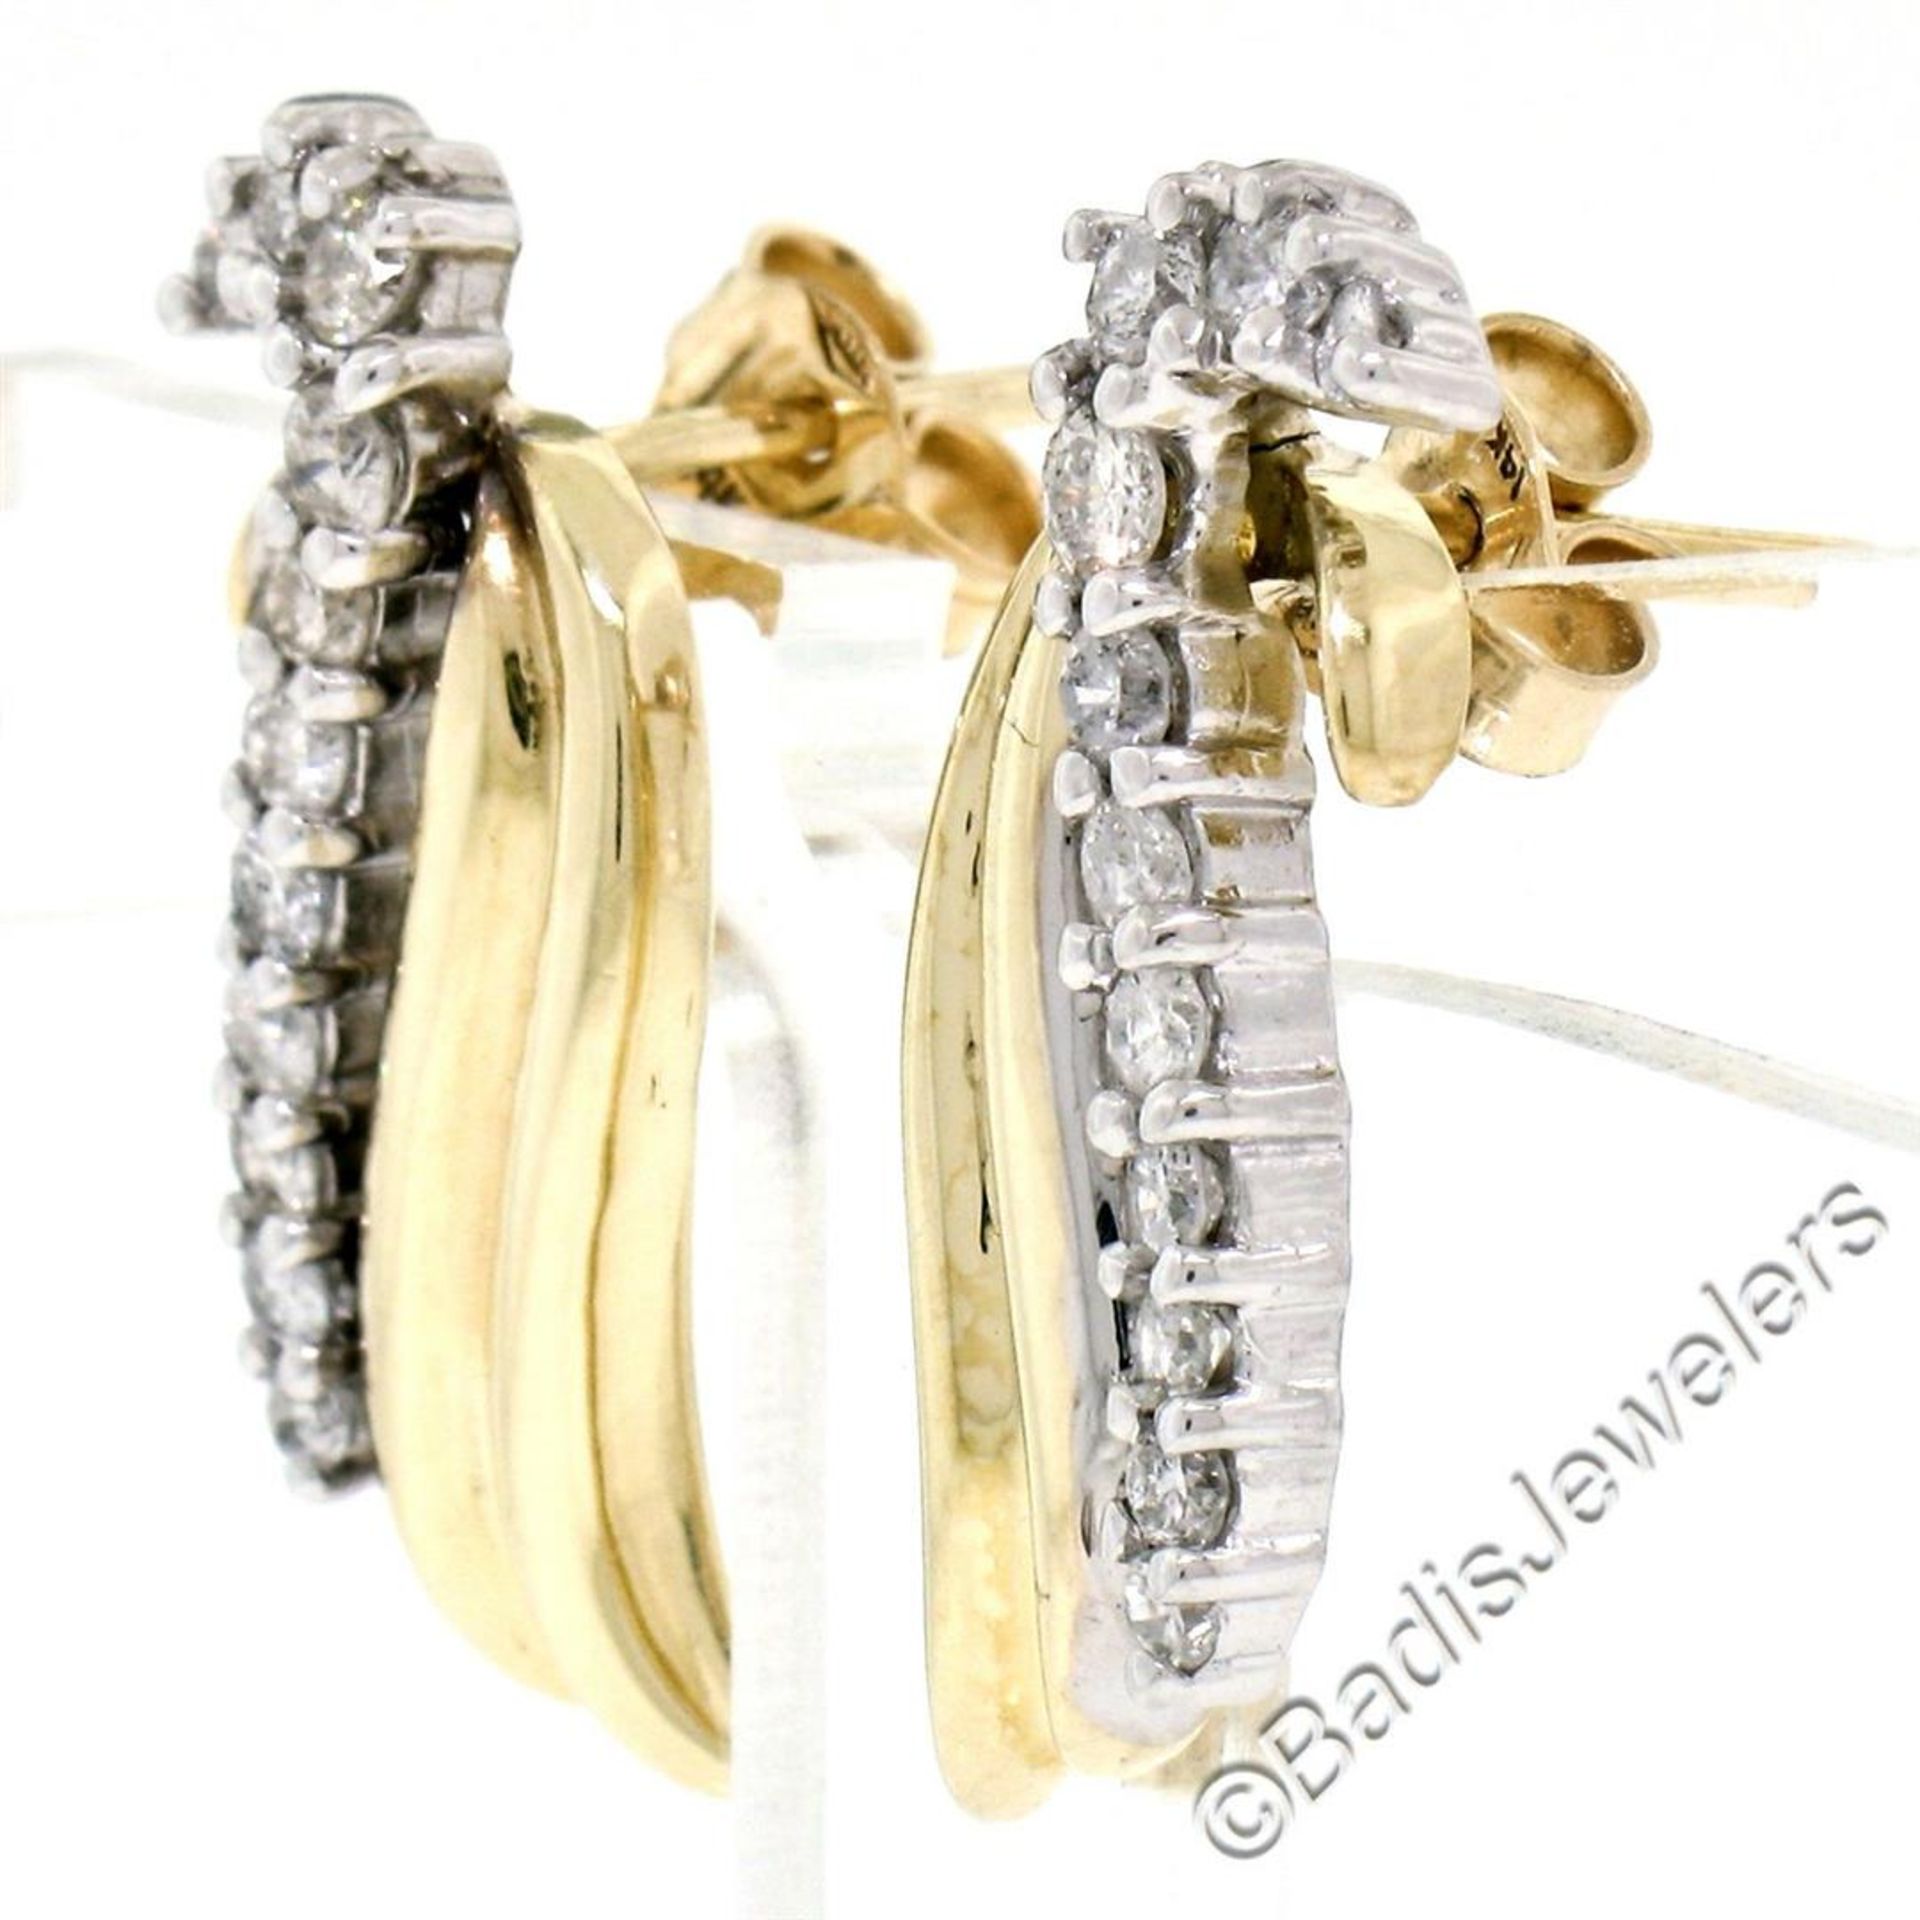 14kt White and Yellow Gold 0.60 ctw Round Diamond Wing Flame Drop Earrings - Image 3 of 6